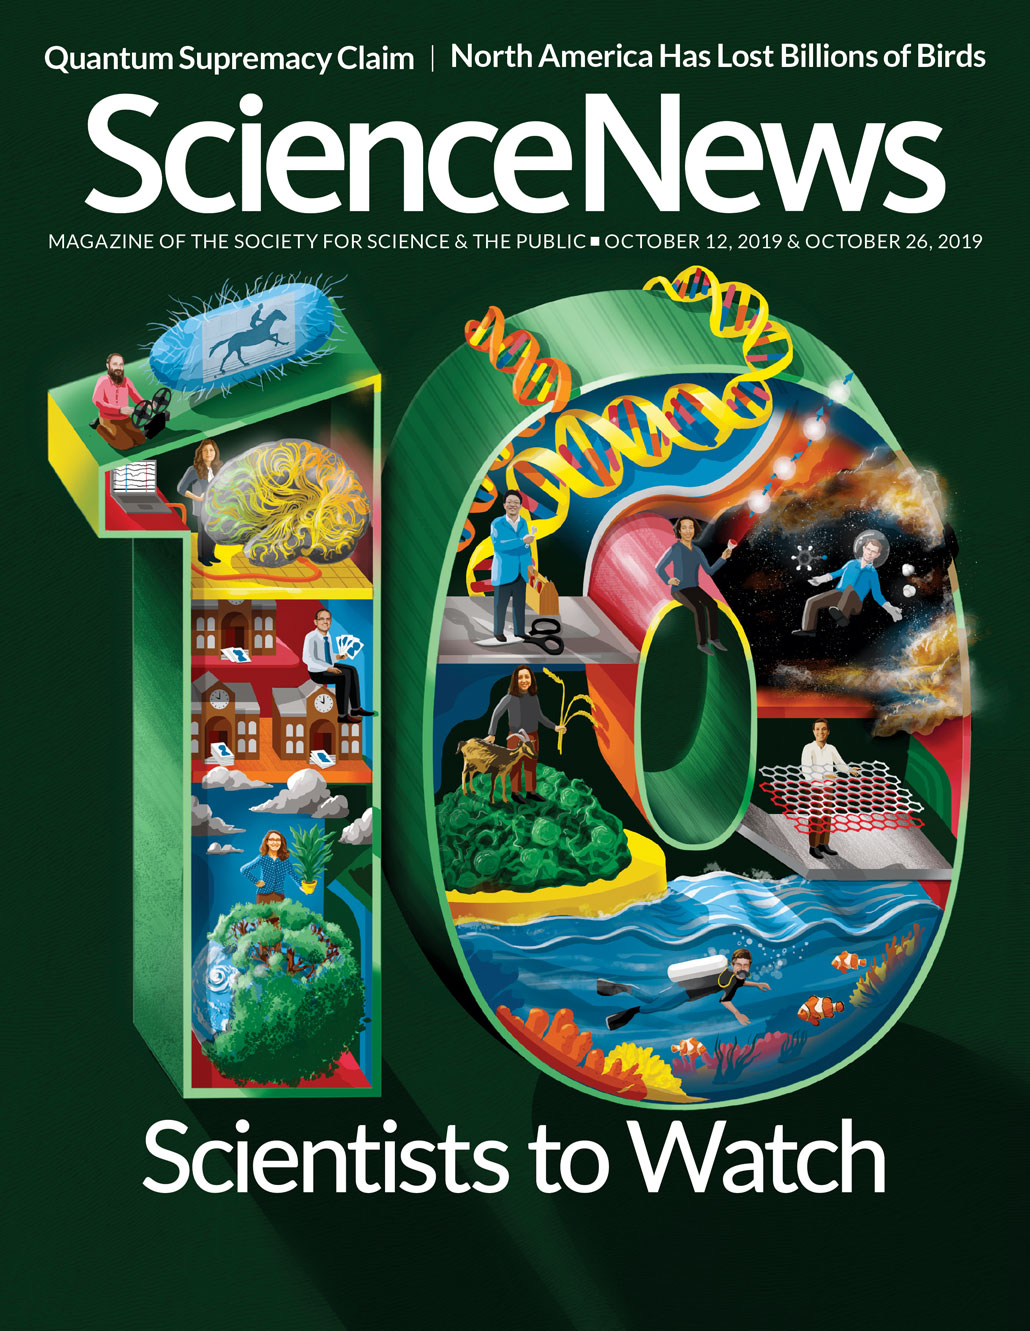 NRAO’s Brett McGuire Part of Science News 10 Scientists to Watch